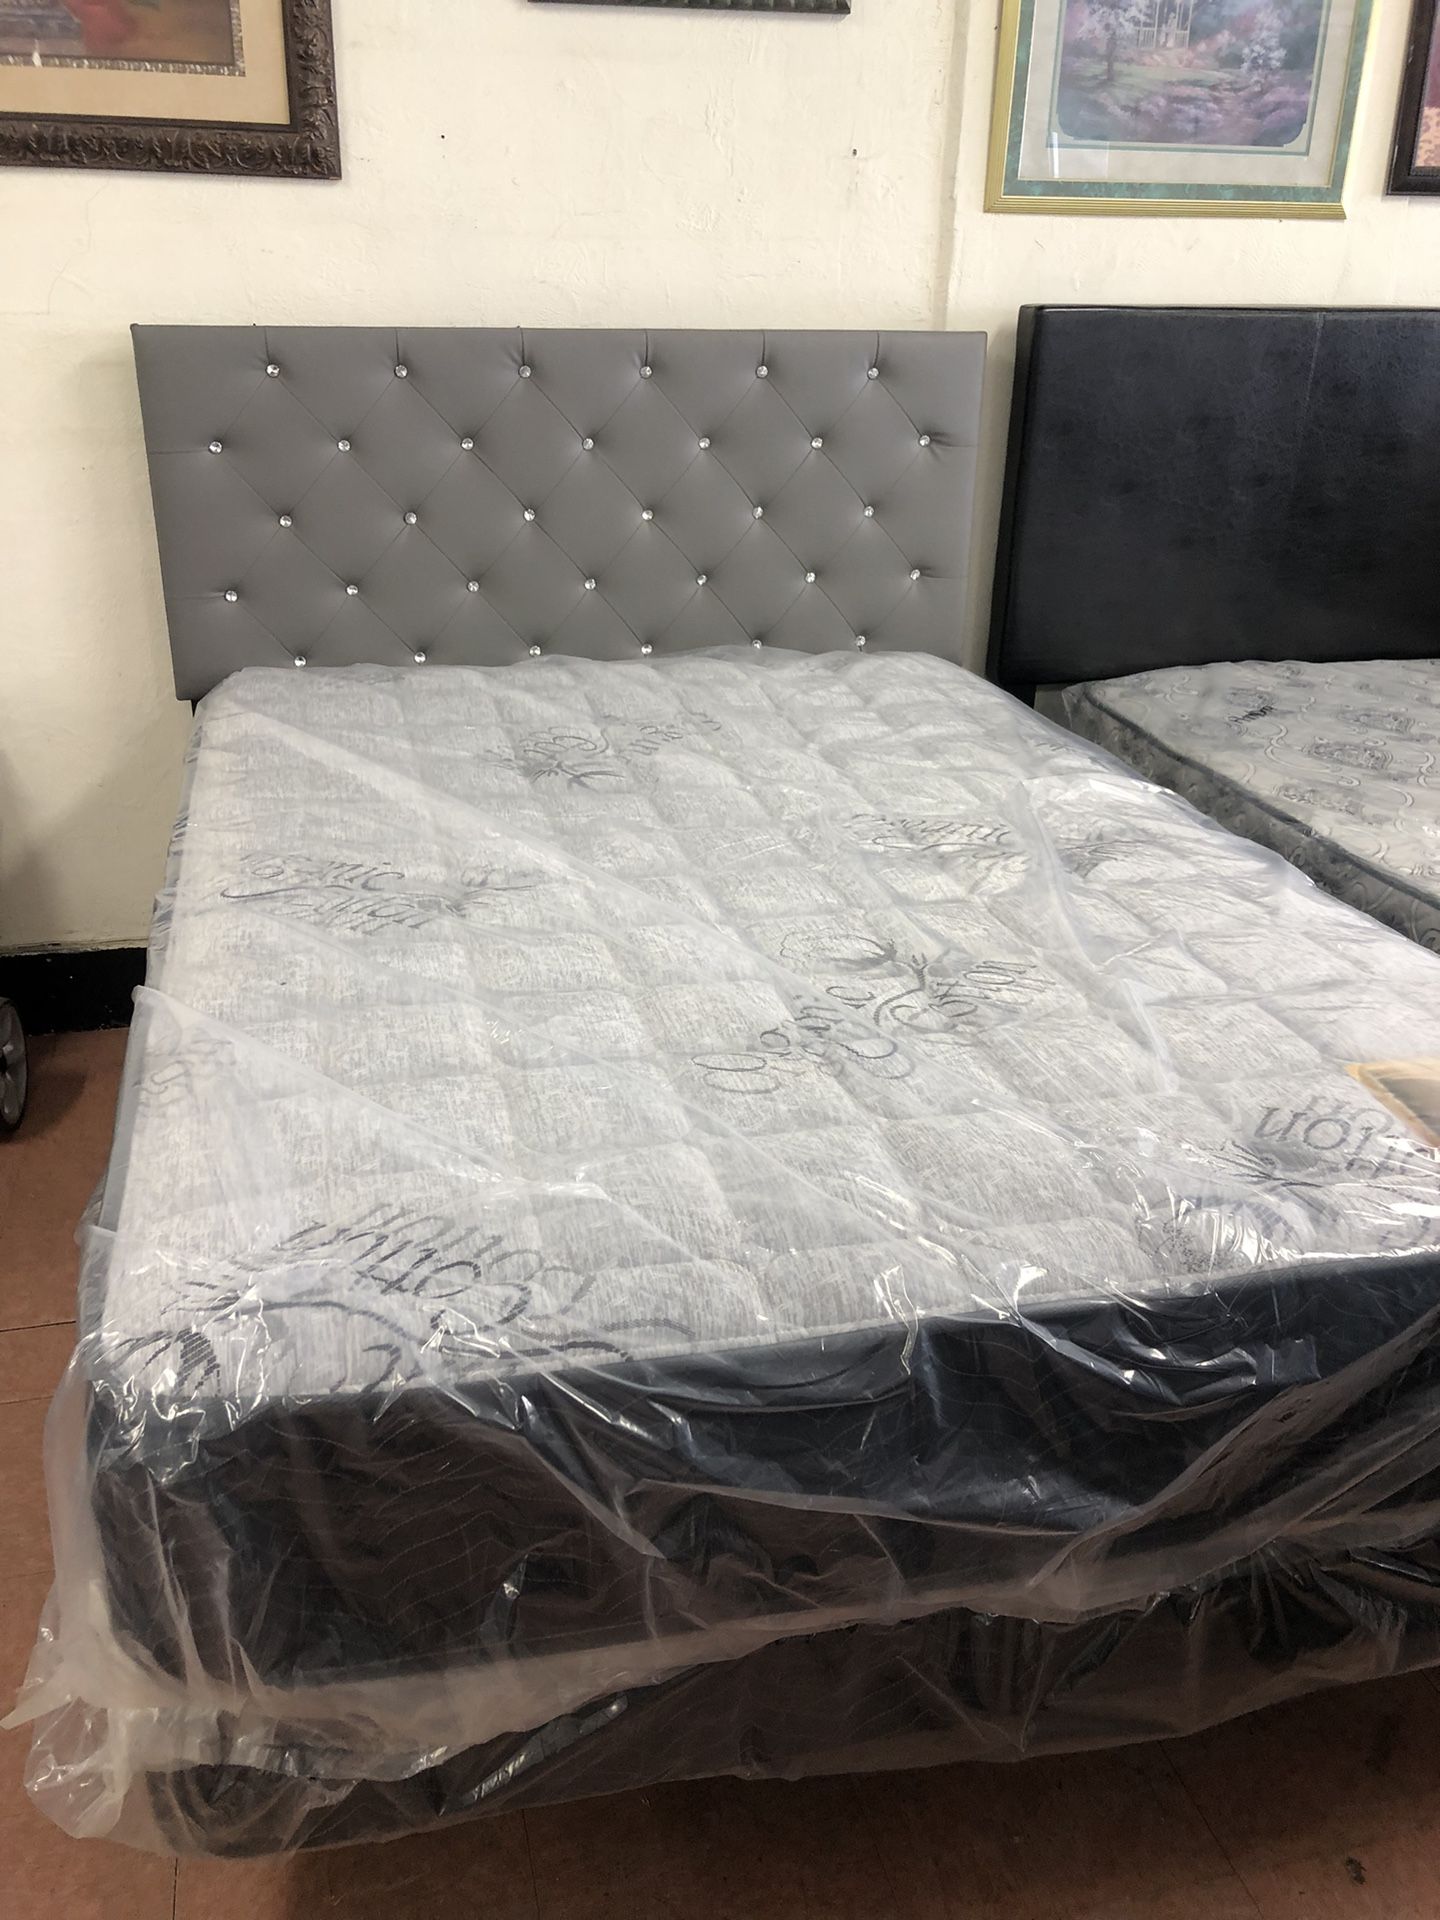 New Full Size Bed Frame With New Mattress And Boxspring Included